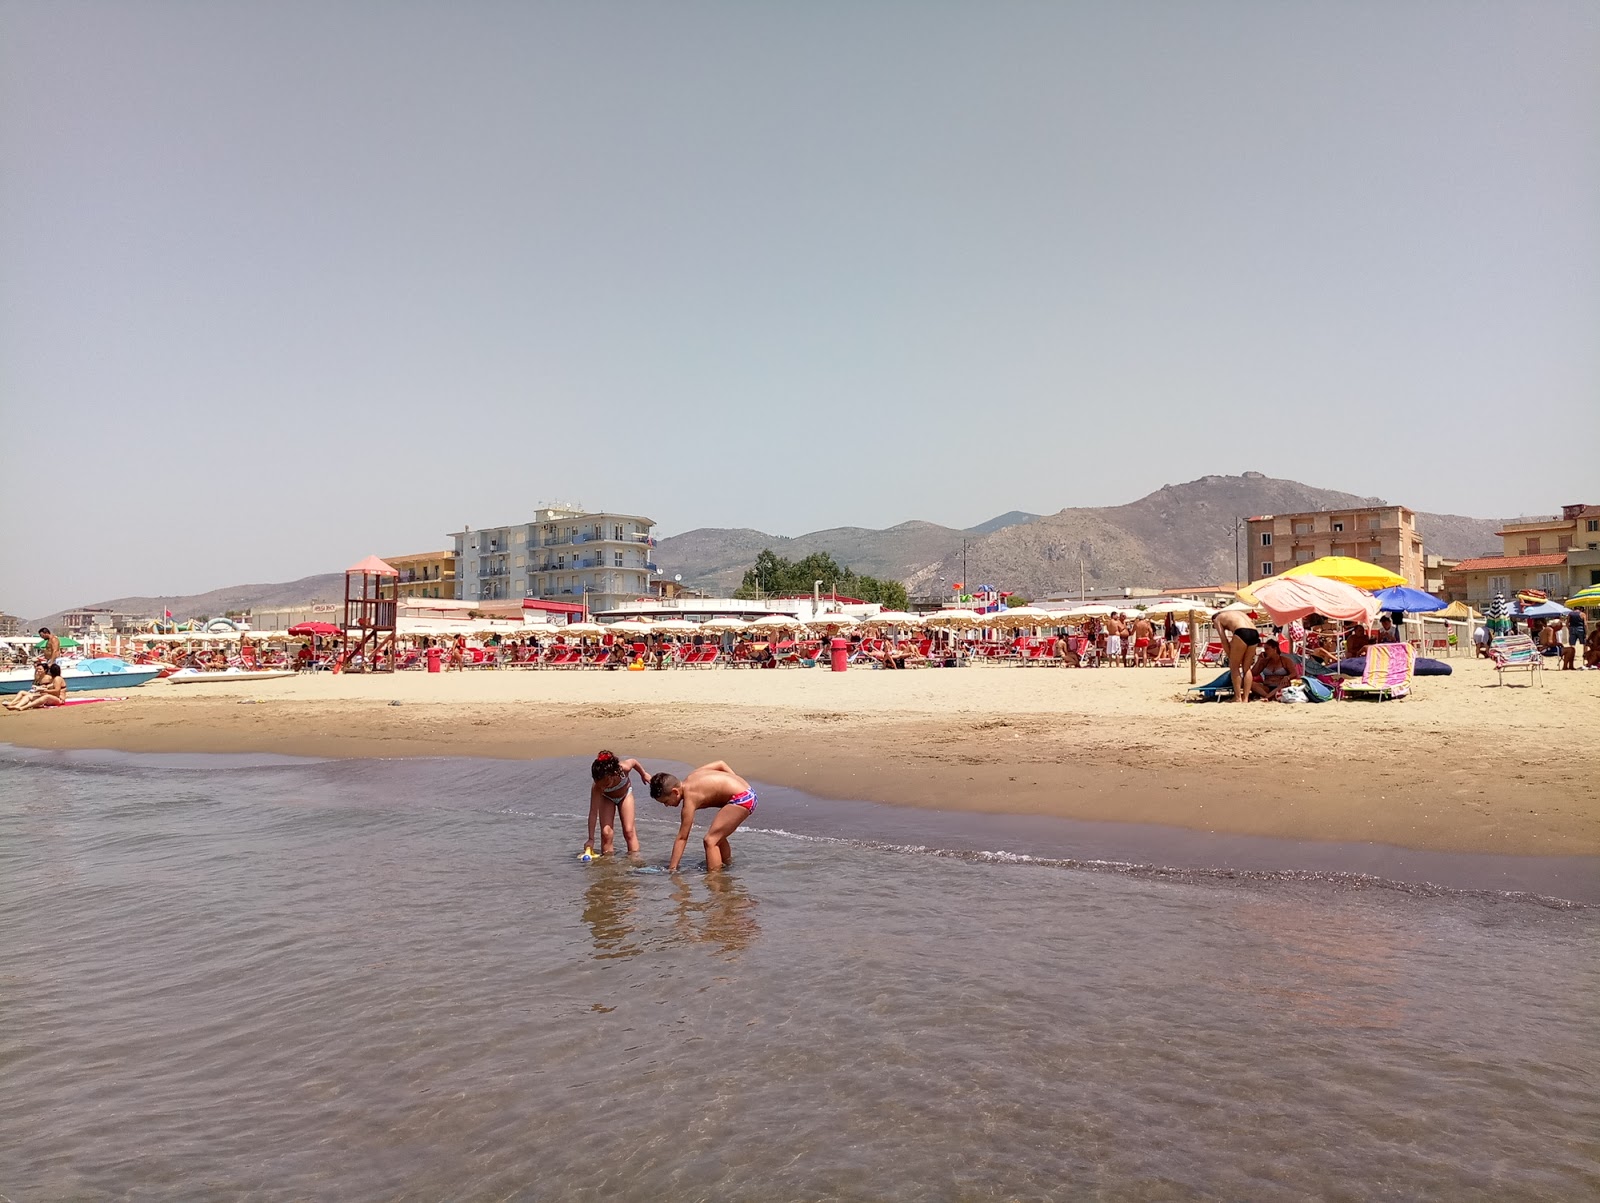 Photo of Spiaggia di Mondragone - popular place among relax connoisseurs